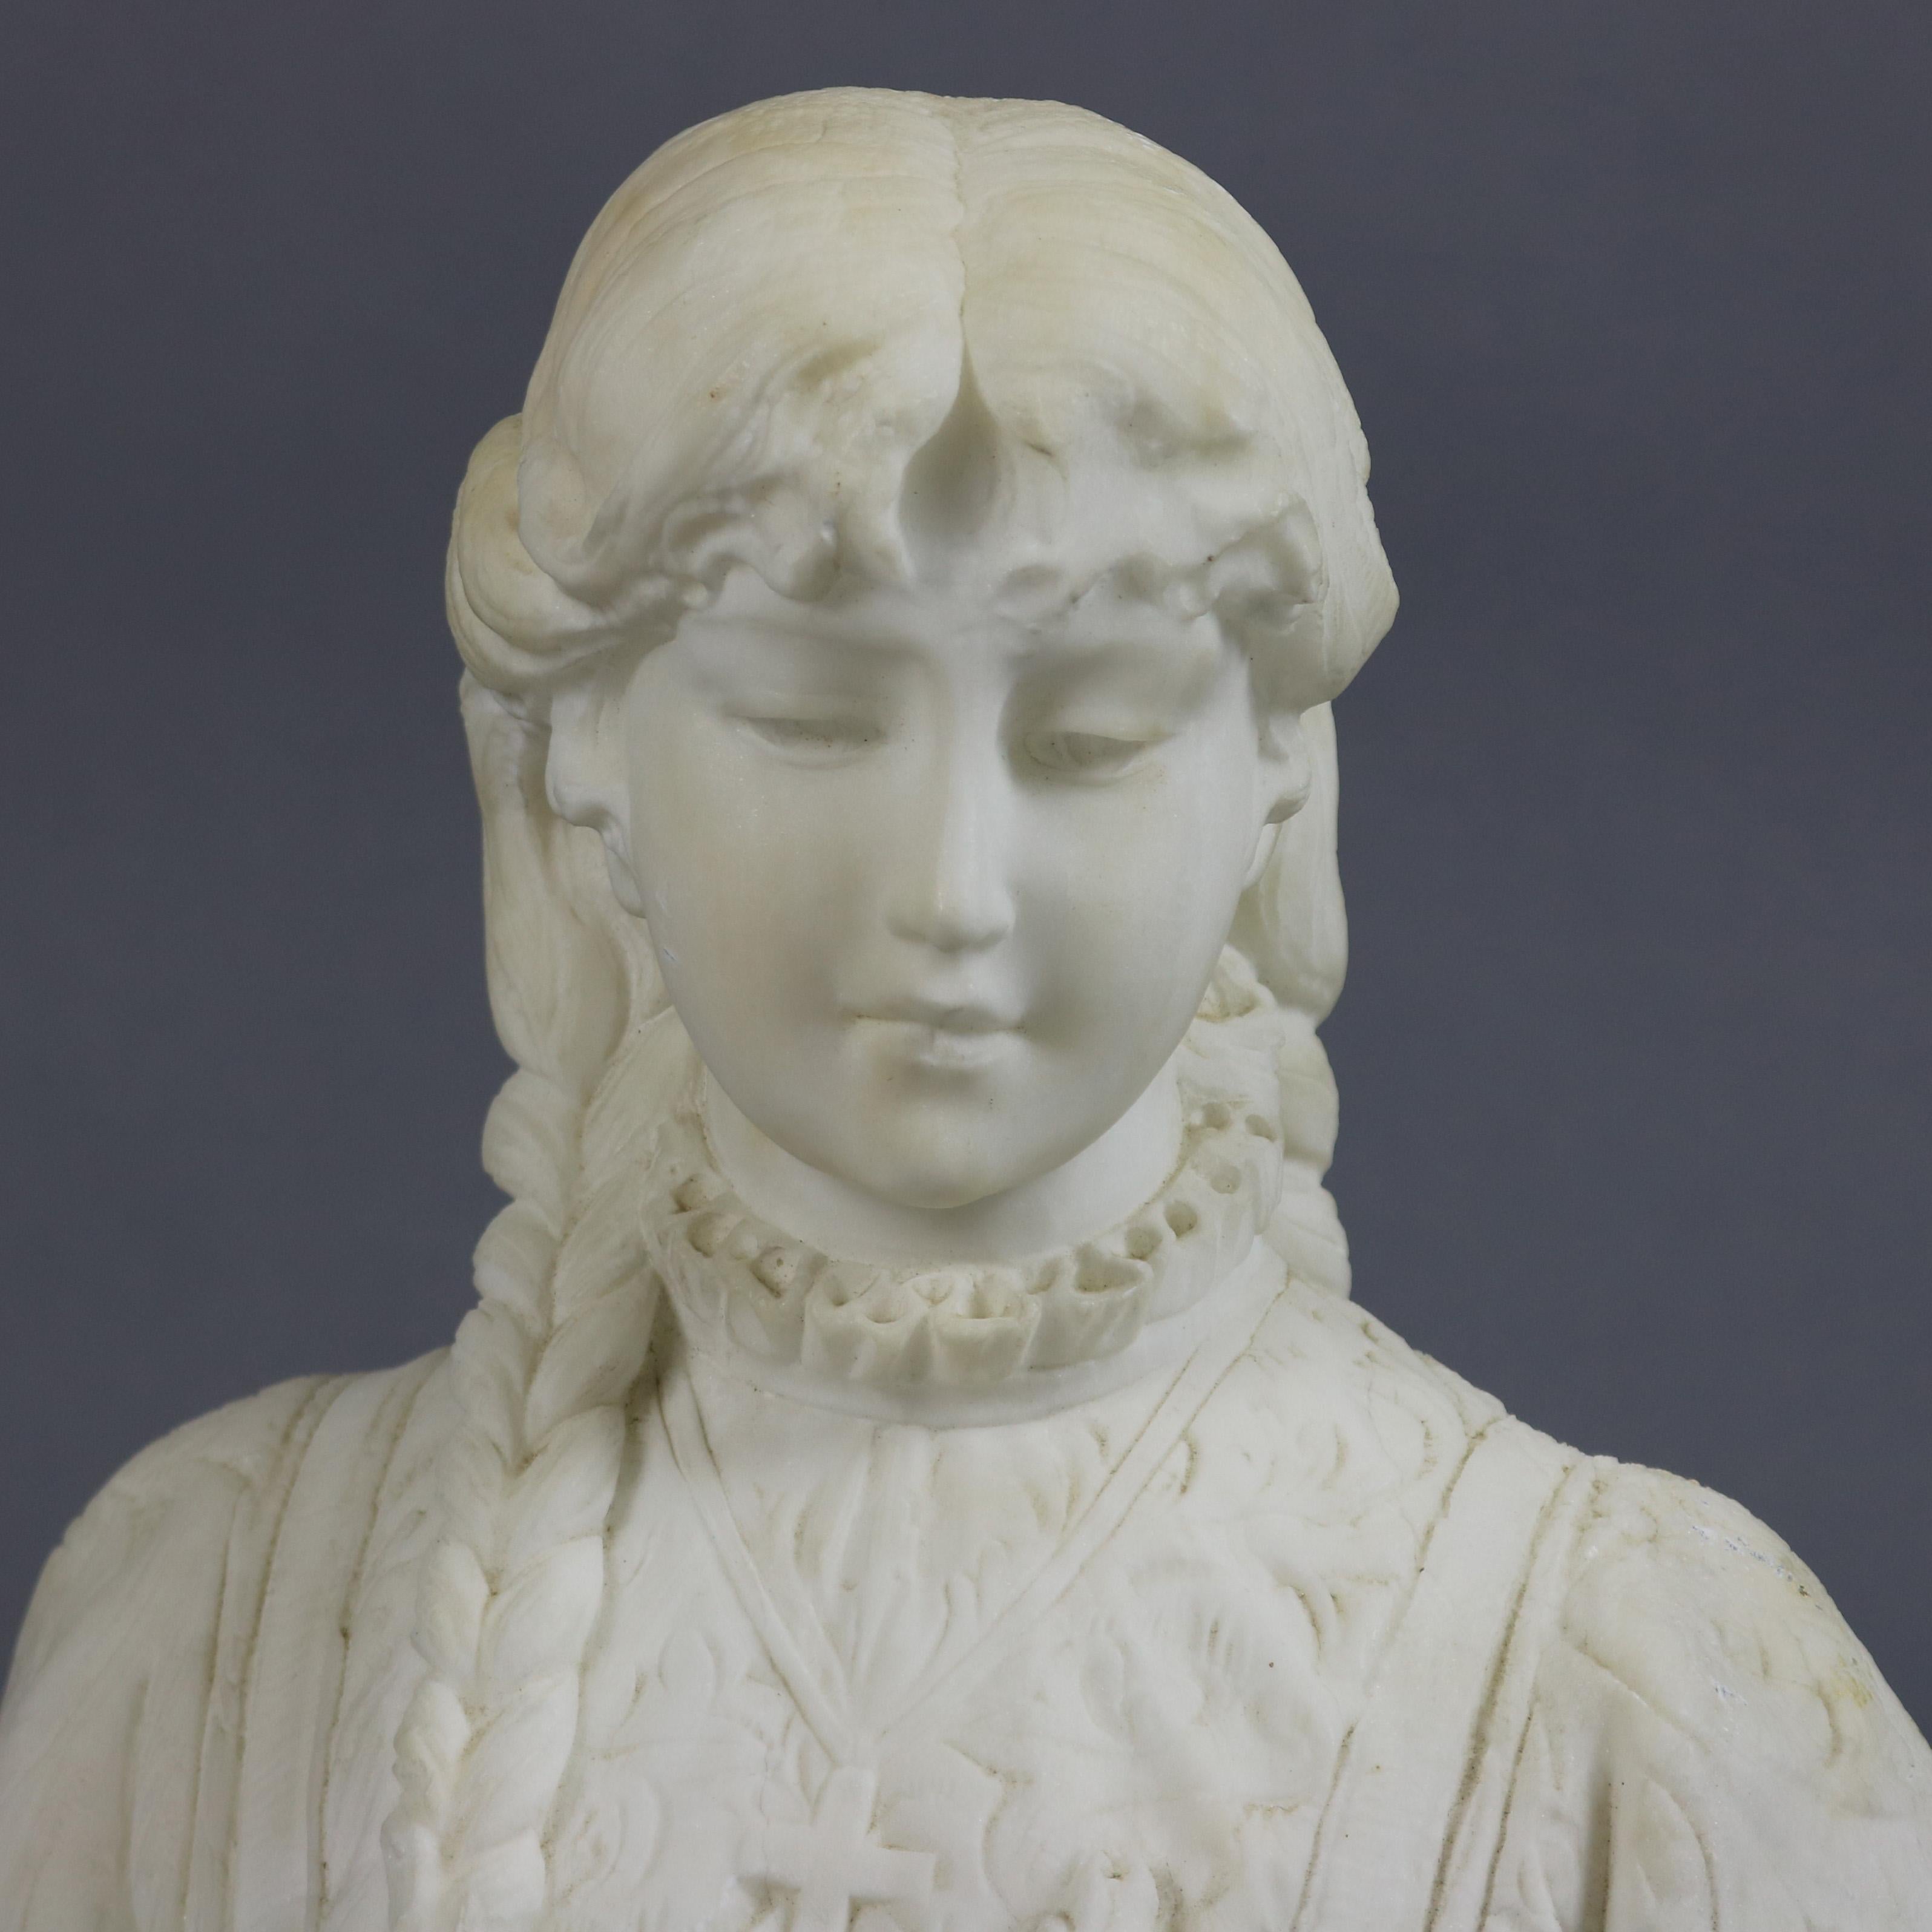 Hand-Carved Antique Classical Italian Carved Alabaster Young Woman Portrait Sculpture